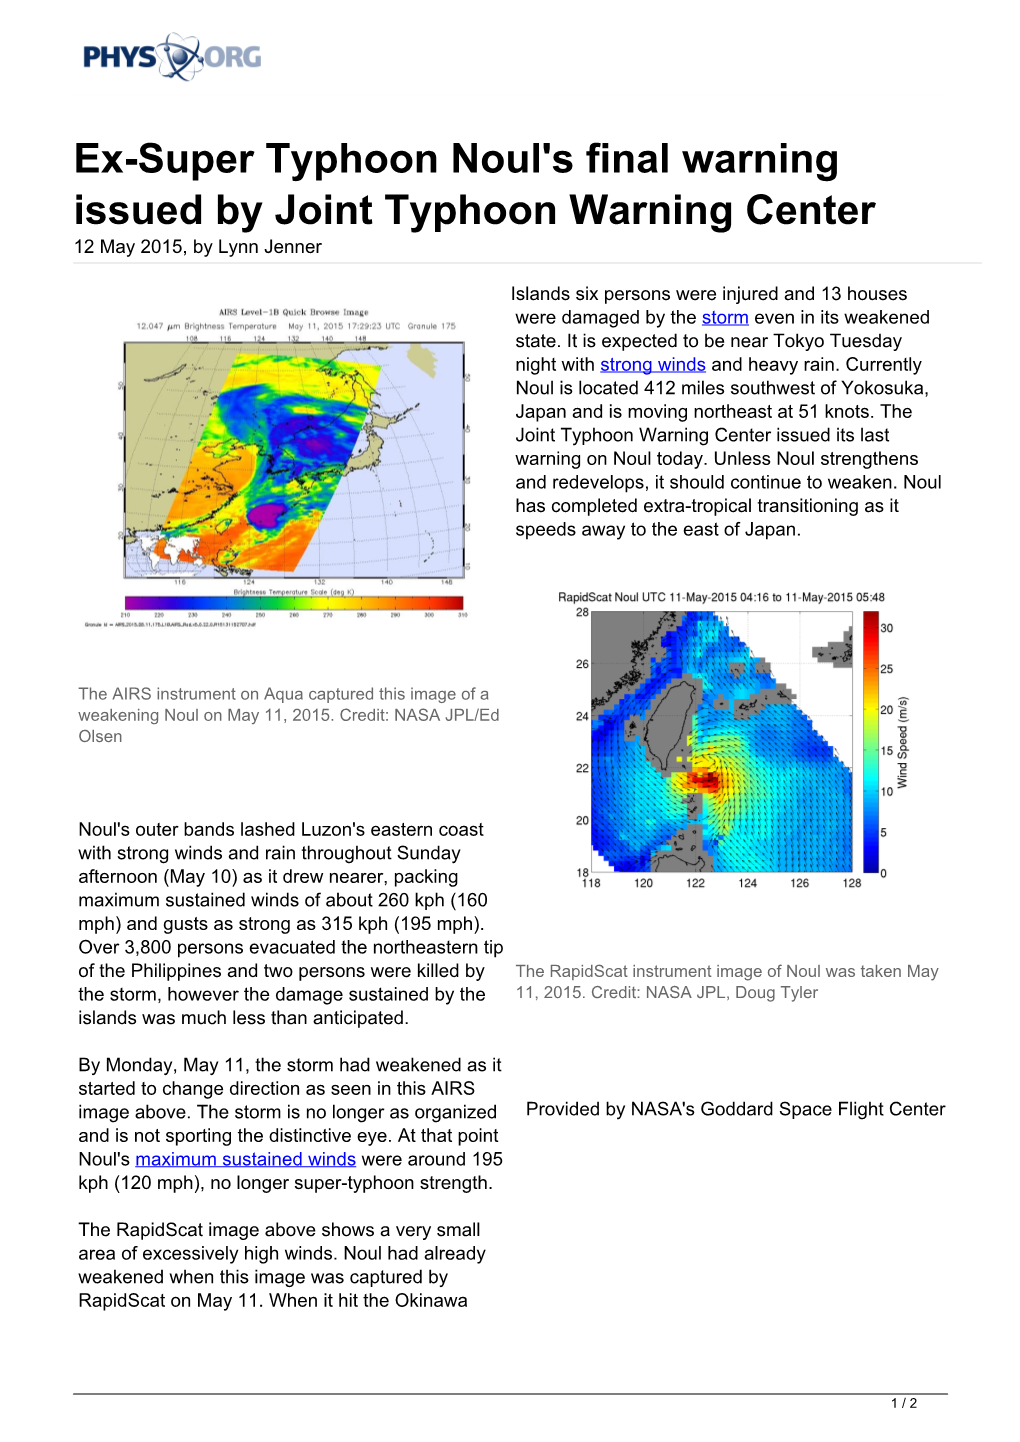 Ex-Super Typhoon Noul's Final Warning Issued by Joint Typhoon Warning Center 12 May 2015, by Lynn Jenner